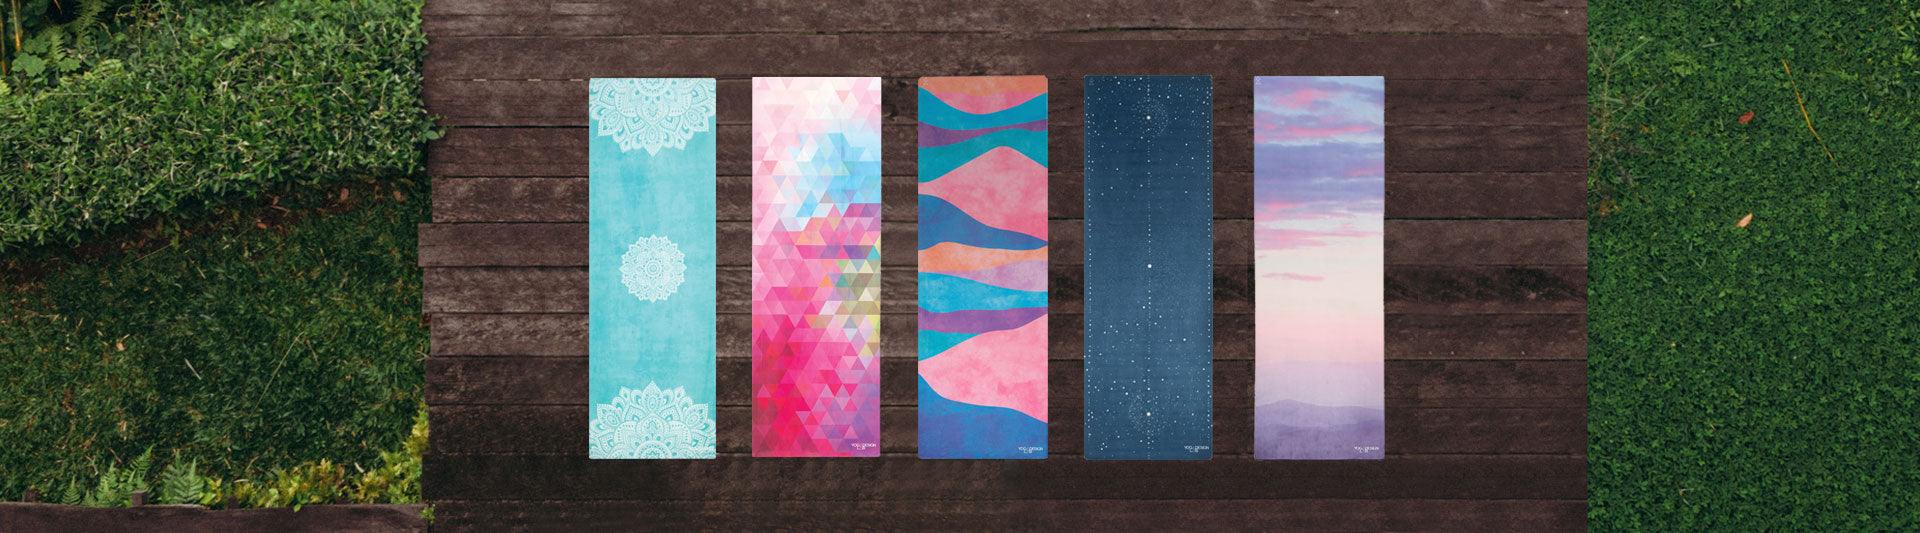 YDL Combo Yoga Mats Collection | Best For Hot Practices - Yoga Design Lab 